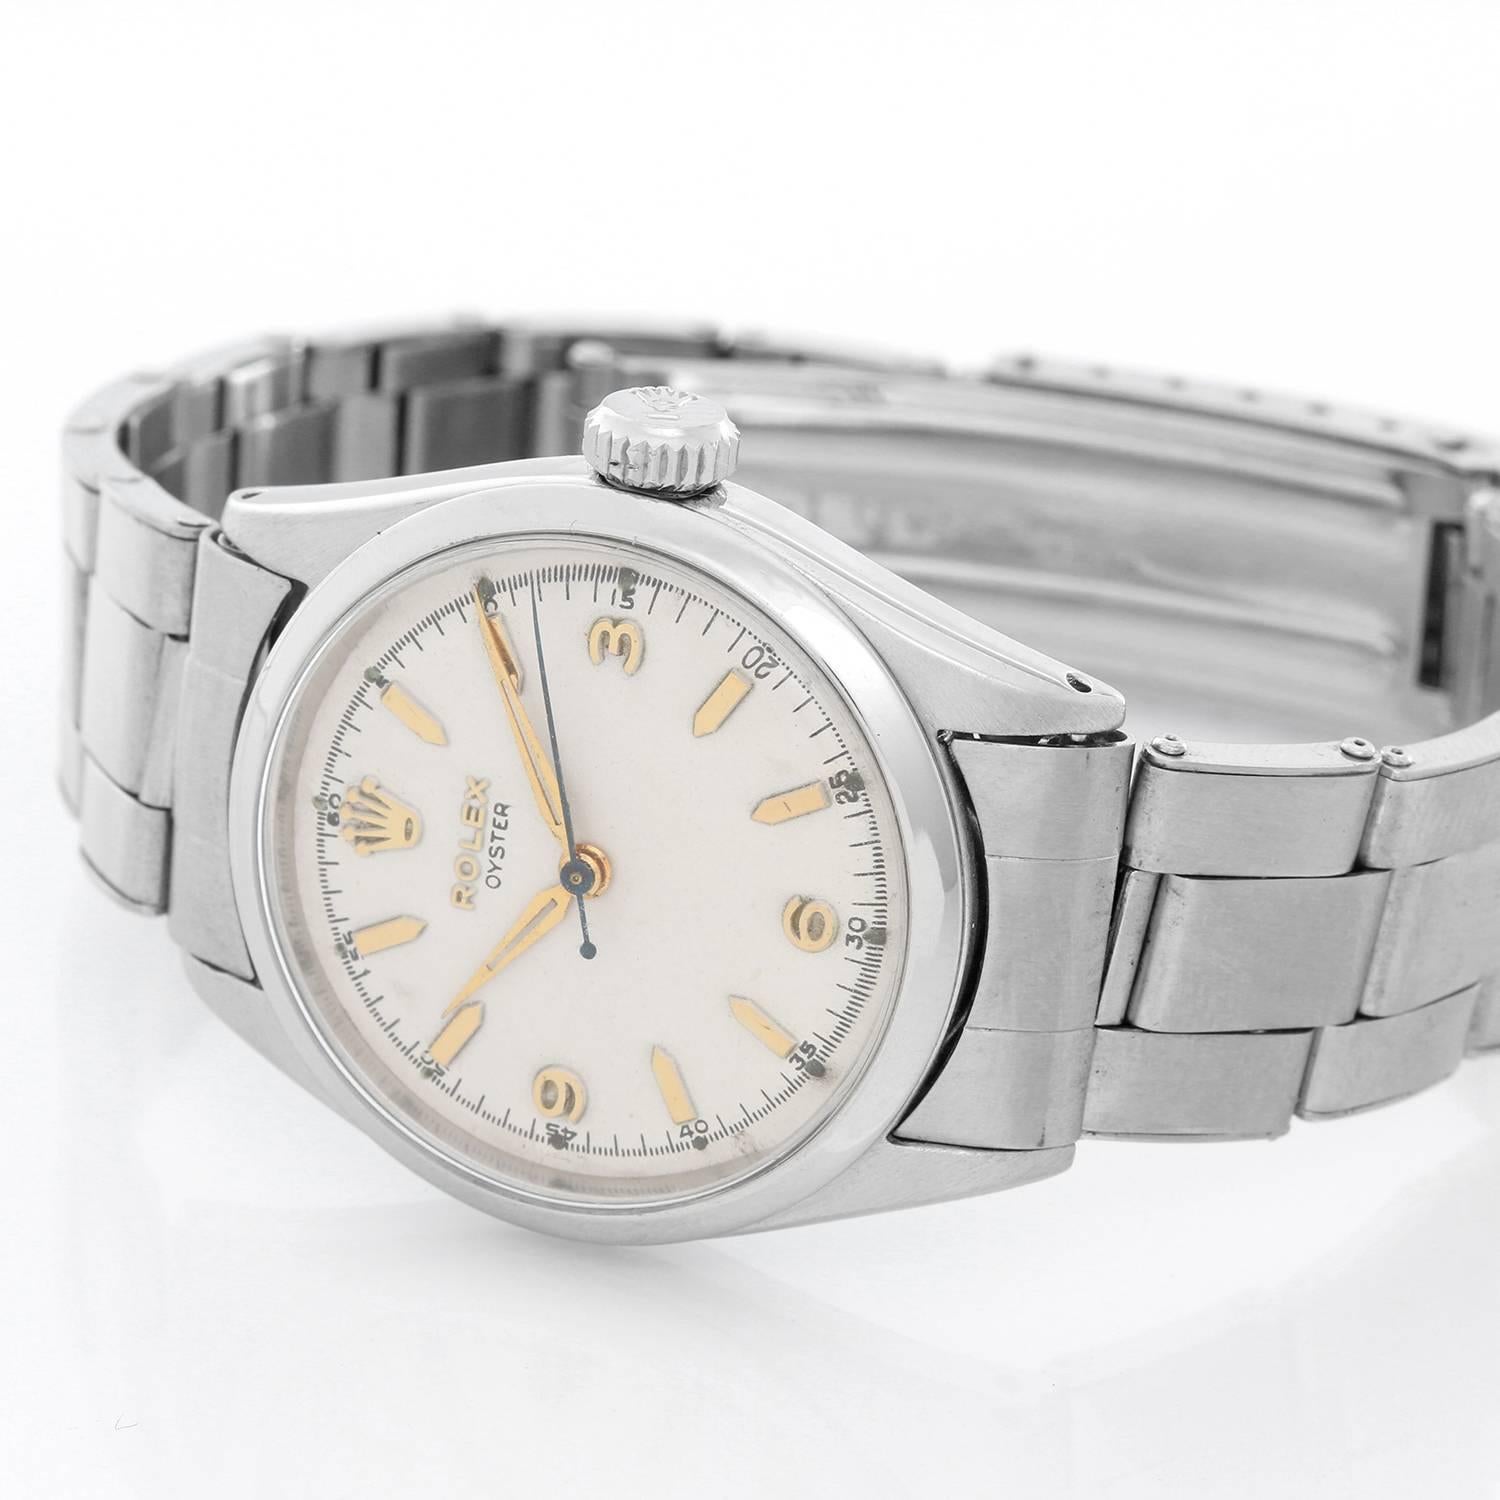 Vintage Rolex Oyster Royal Stainless Steel Ref 6444 -  Manual. Stainless steel ( 31 mm). White dial; gold markers with Explorer style 3-6-9 numerals.. Stainless steel oyster bracelet with deployant clasp. Pre-owned.